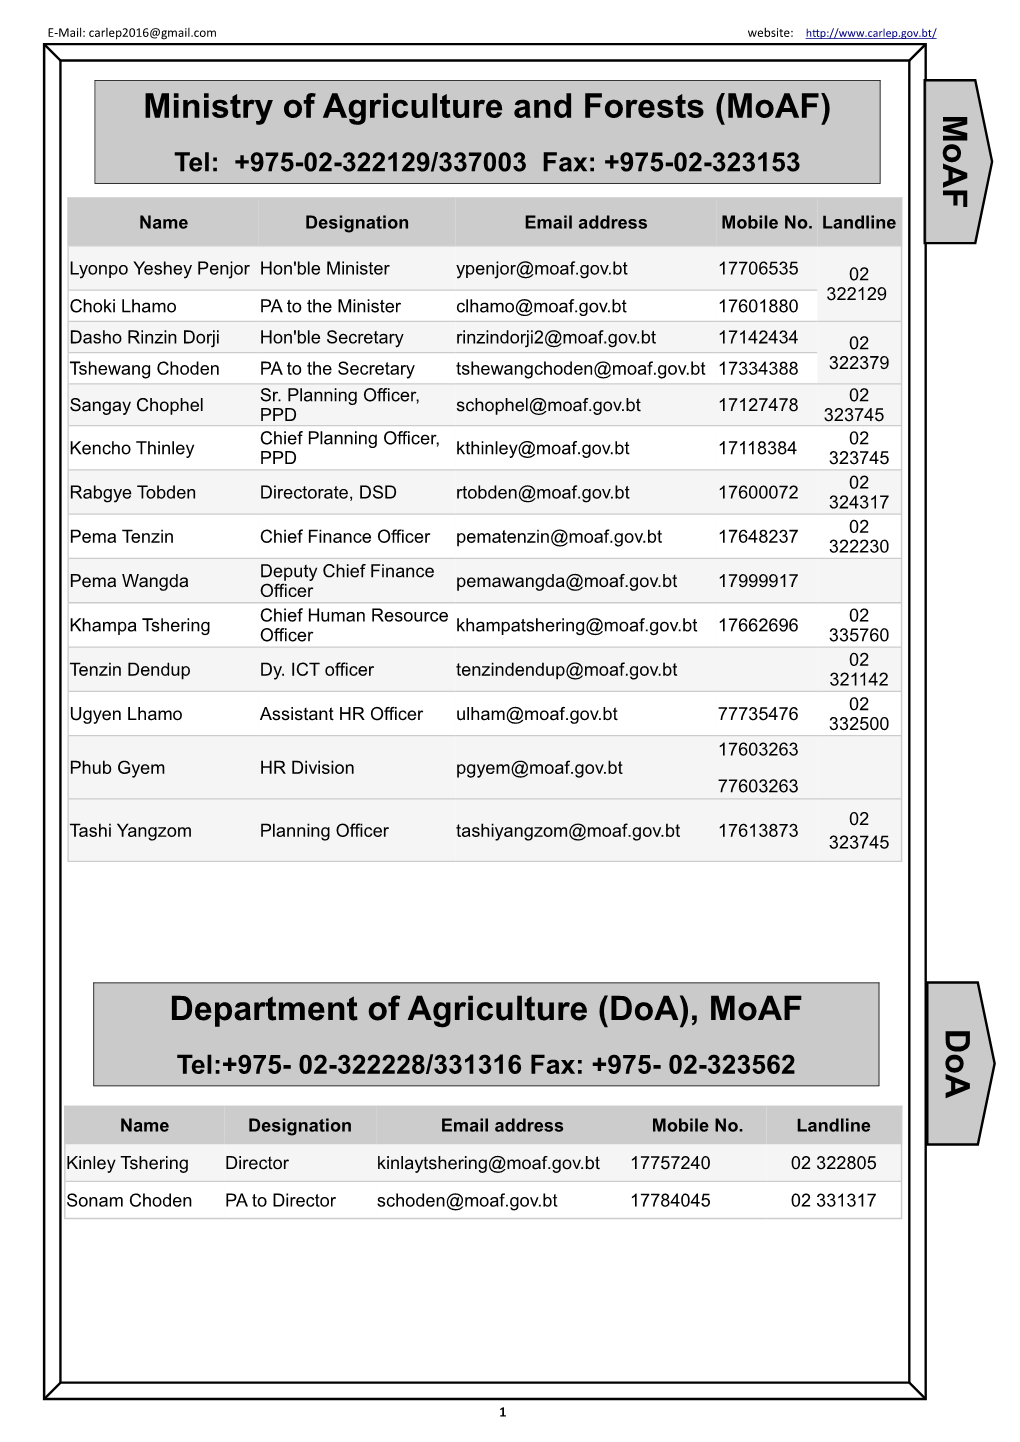 Moaf Department of Agriculture (Doa)